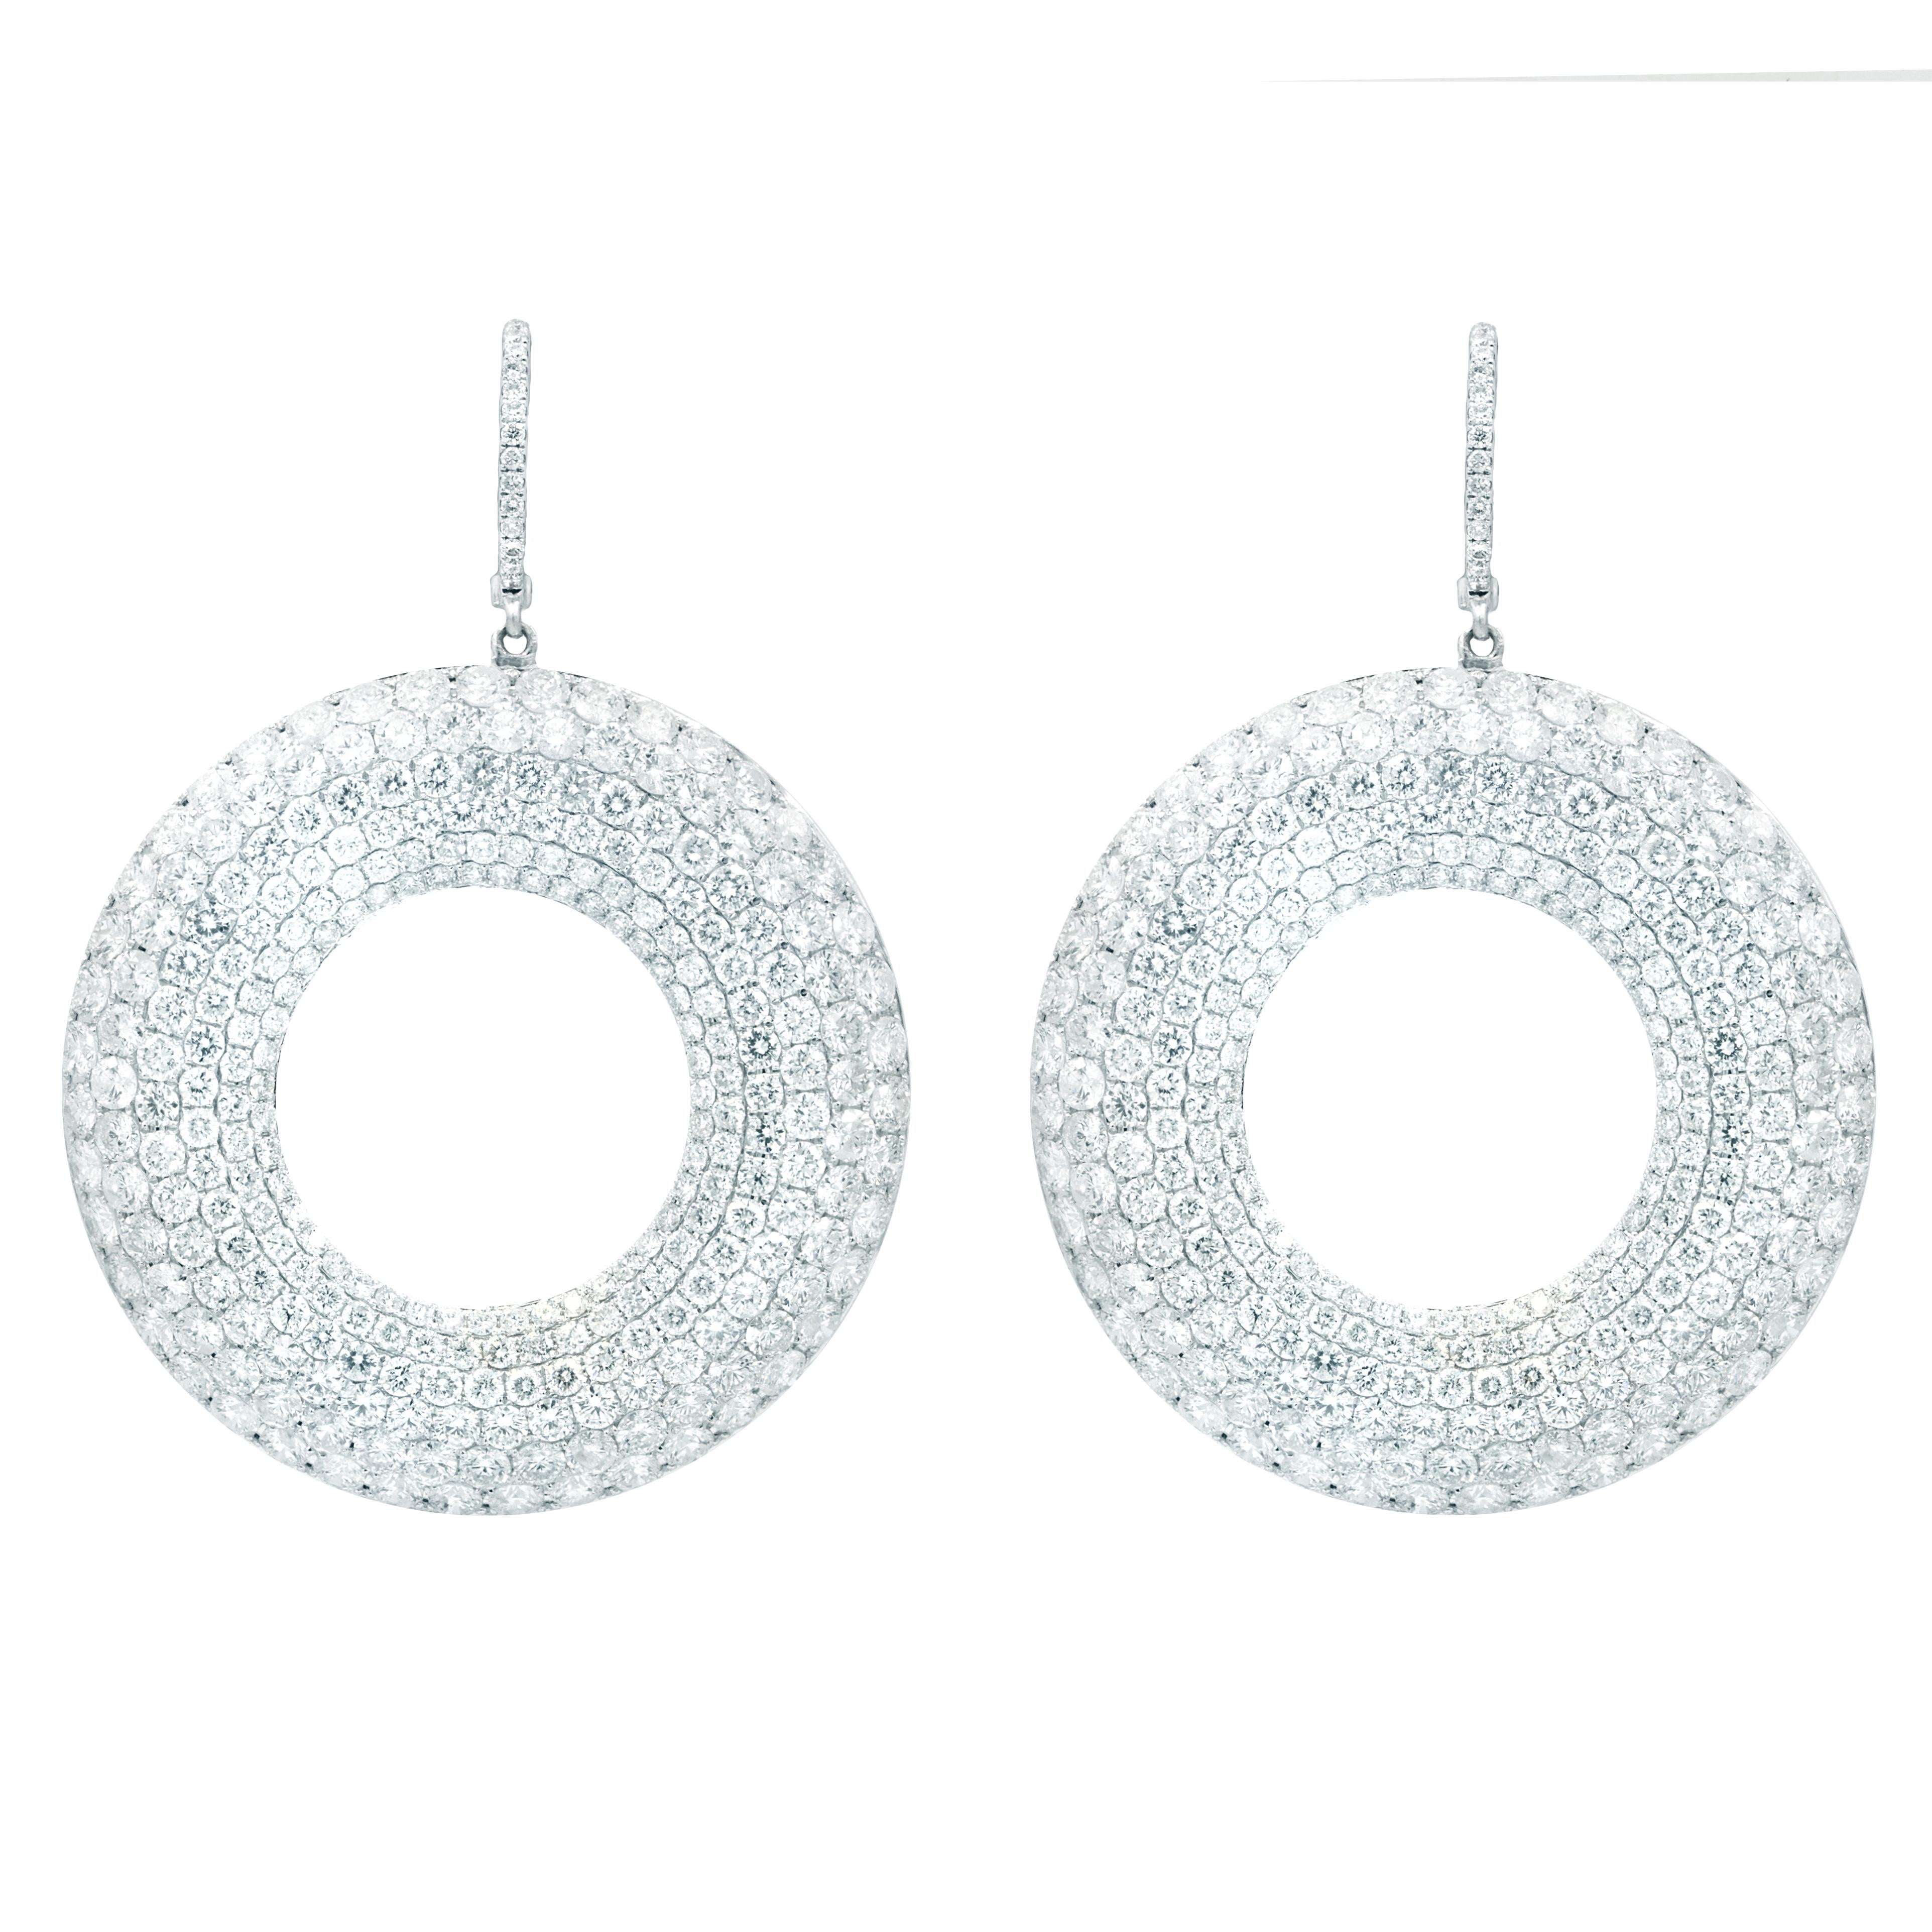 18 kt white gold fashion micropave earrings multiple rows containging 16.38 cts tws of diamonds.
Diana M. is a leading supplier of top-quality fine jewelry for over 35 years.
Diana M is one-stop shop for all your jewelry shopping, carrying line of